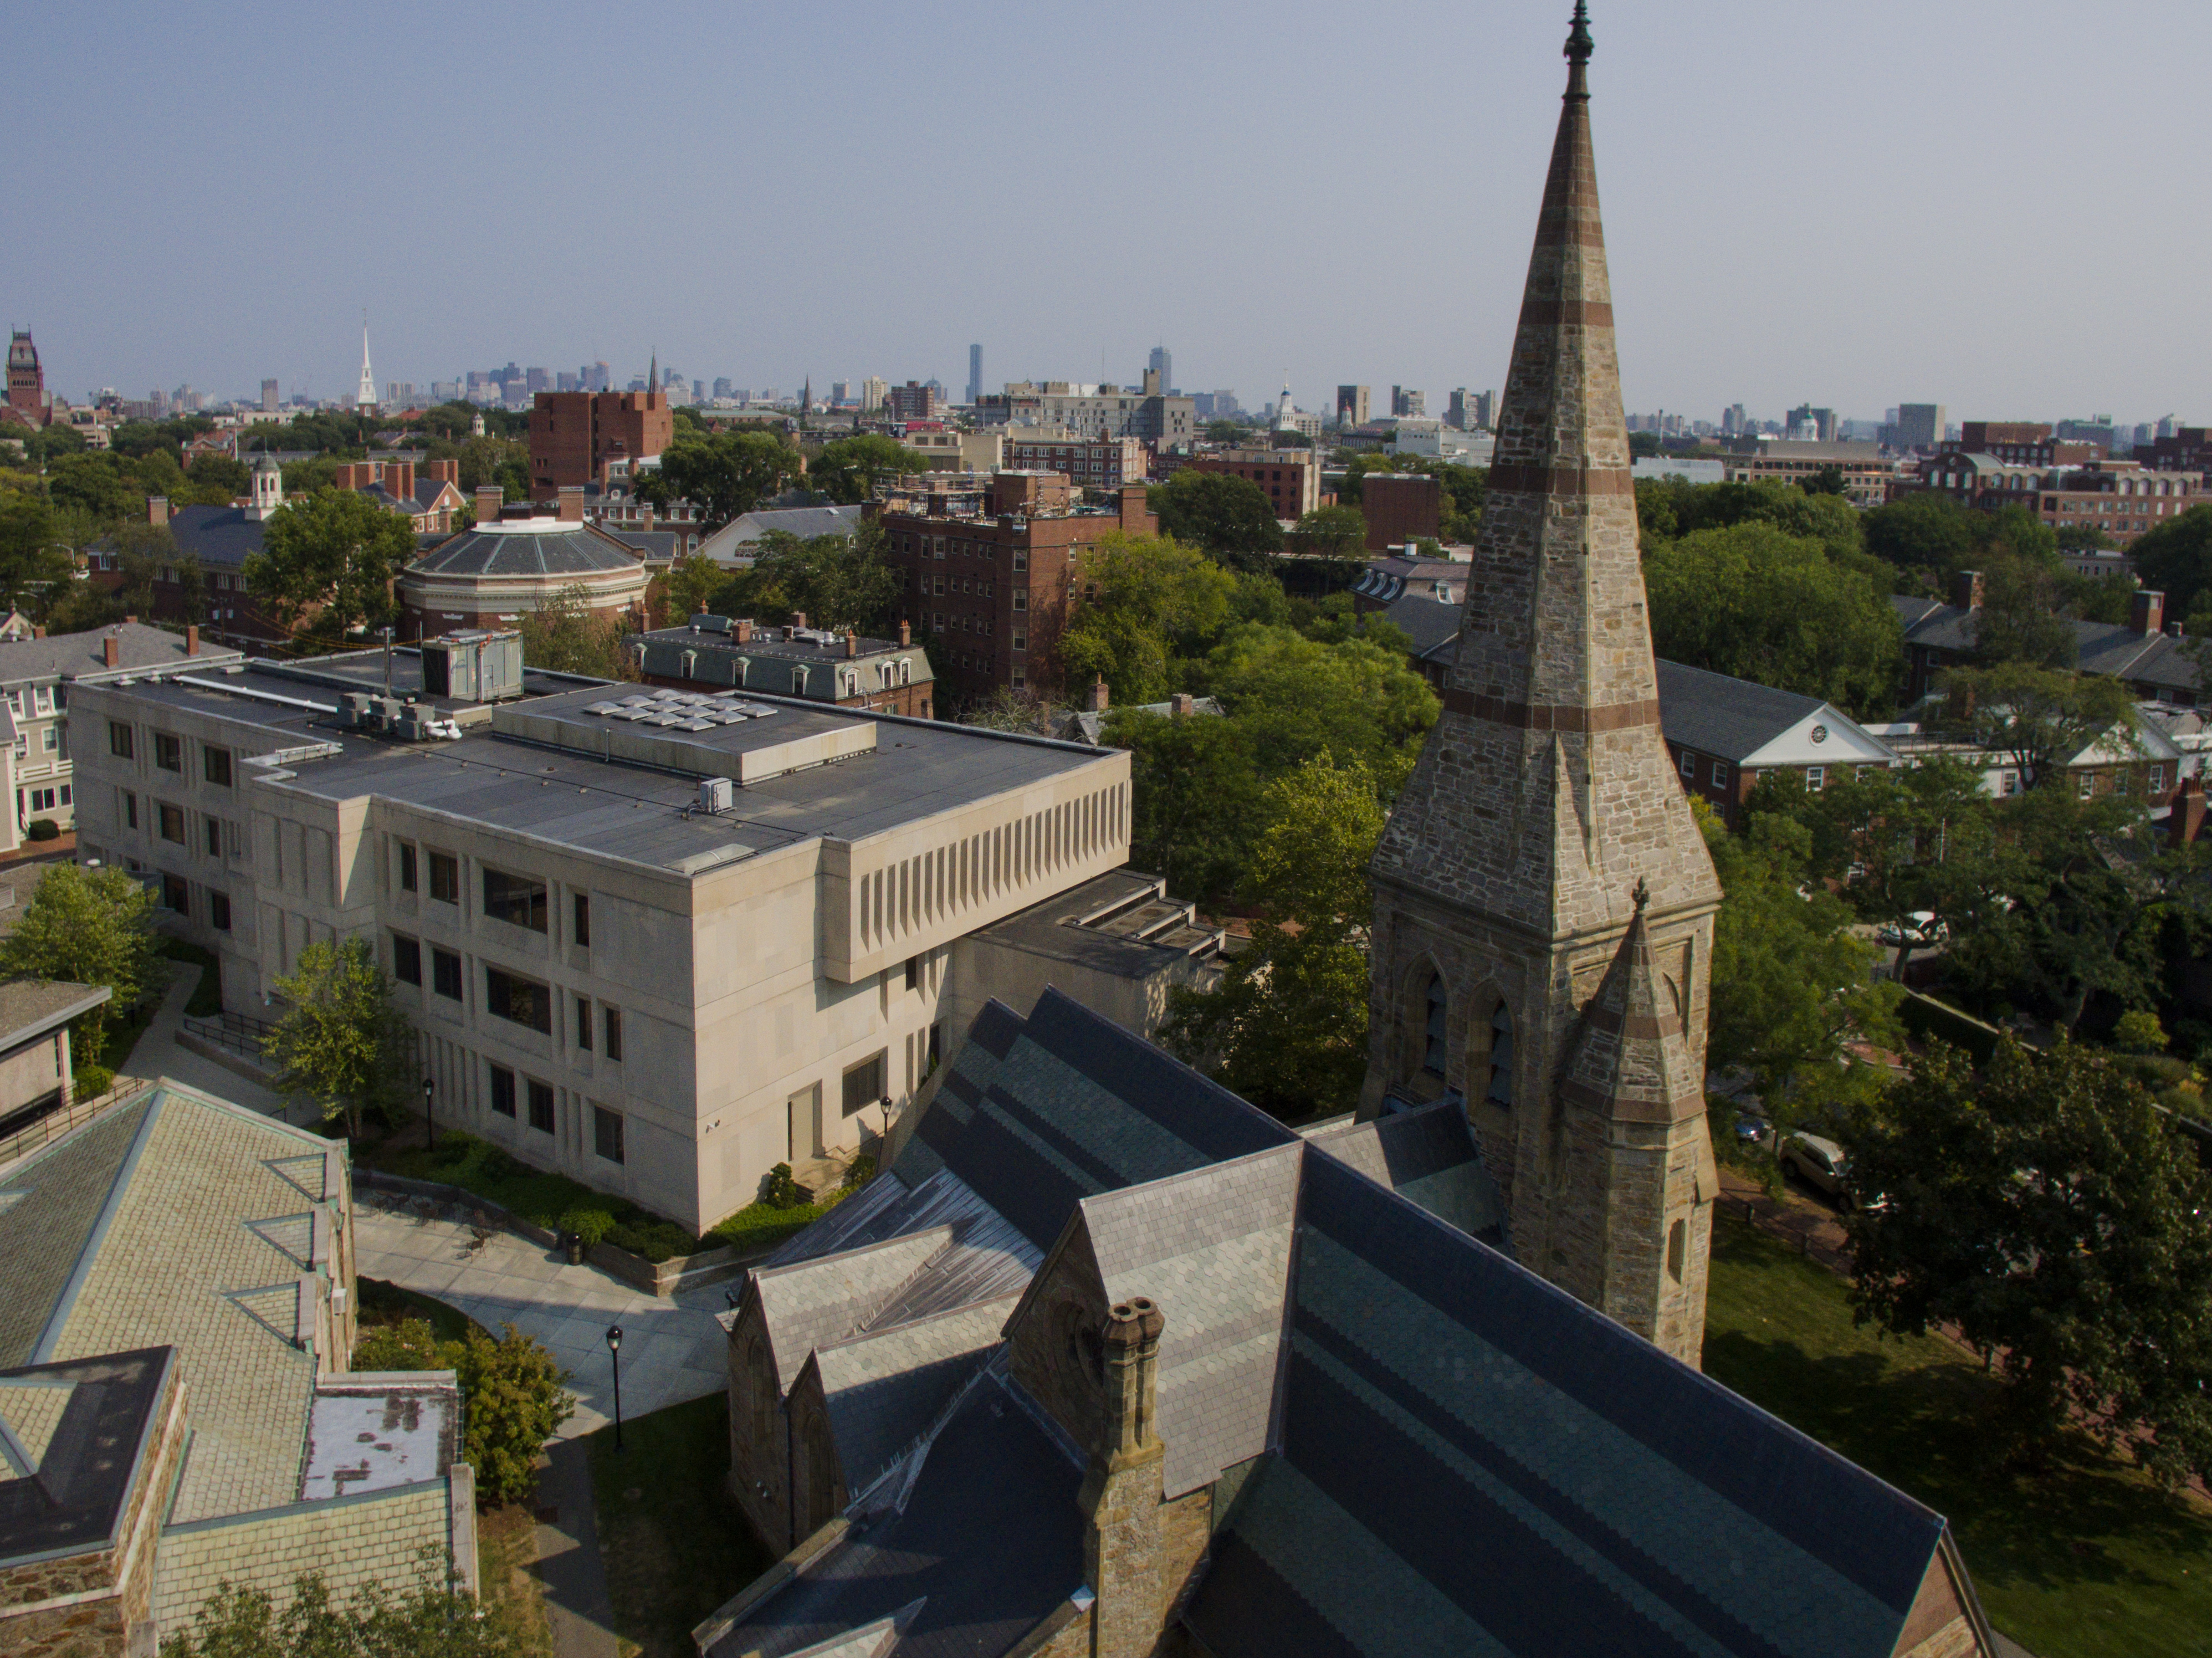 Aerial shot of Cambridge with Sherrill Library and St. John's Chapel in the foreground.